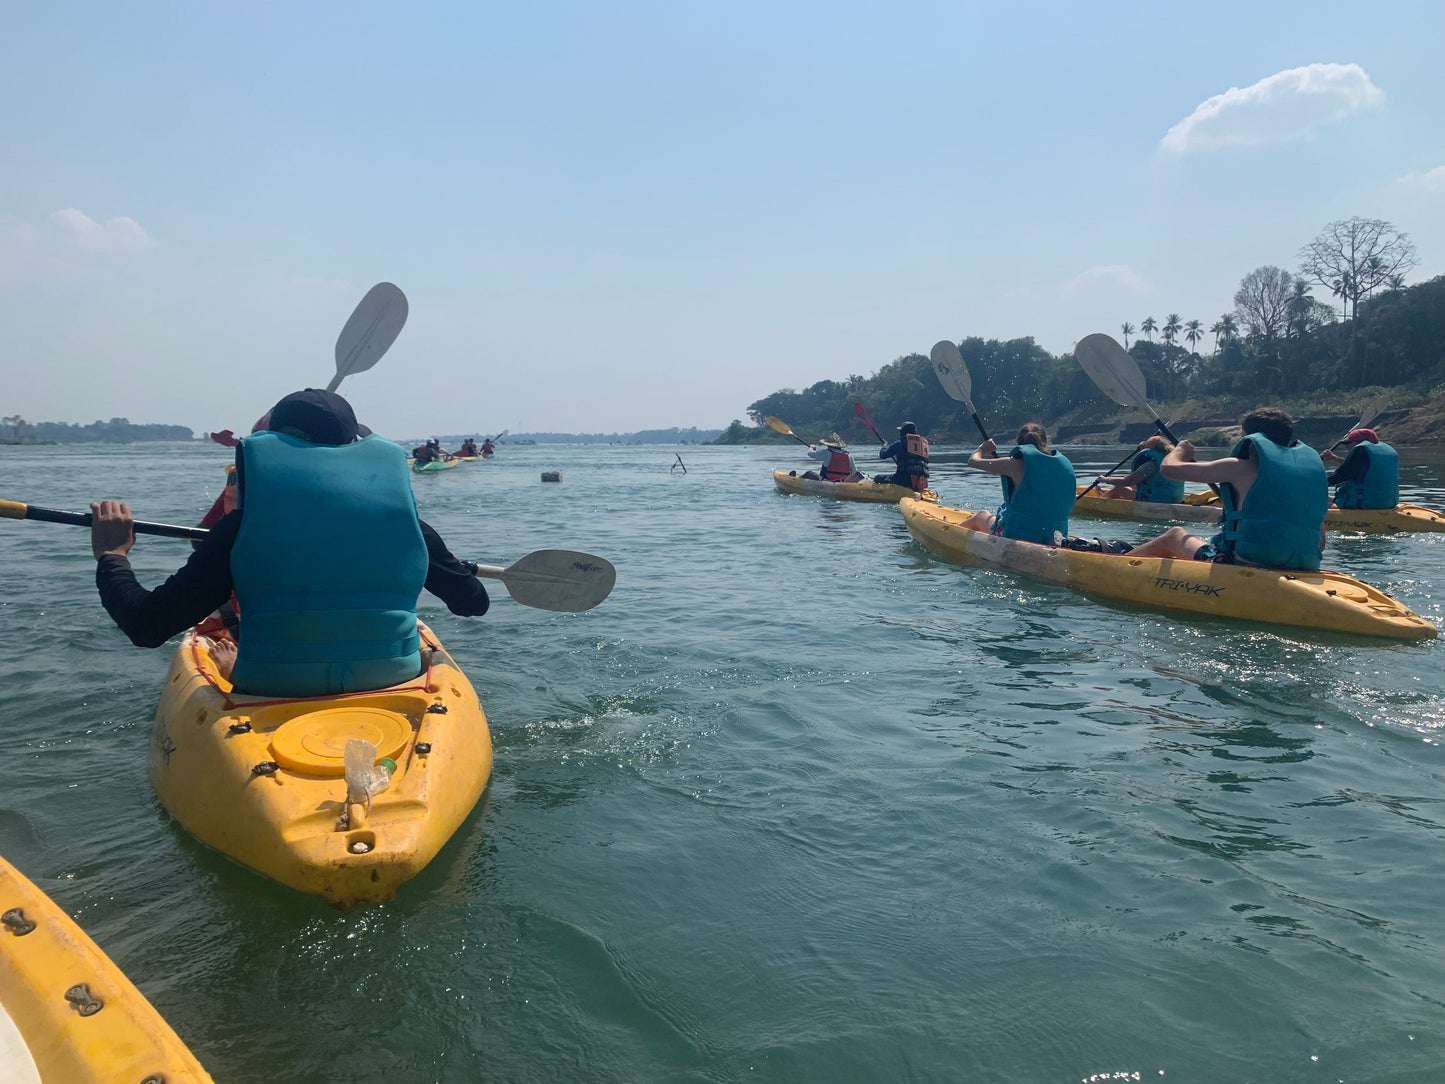 A7D: (4 DAYS) Laos Unleashed: The Ultimate Adventure Through Pakse Loops, Kayaking The 4000 Islands, And Immersive Cultural Exploration